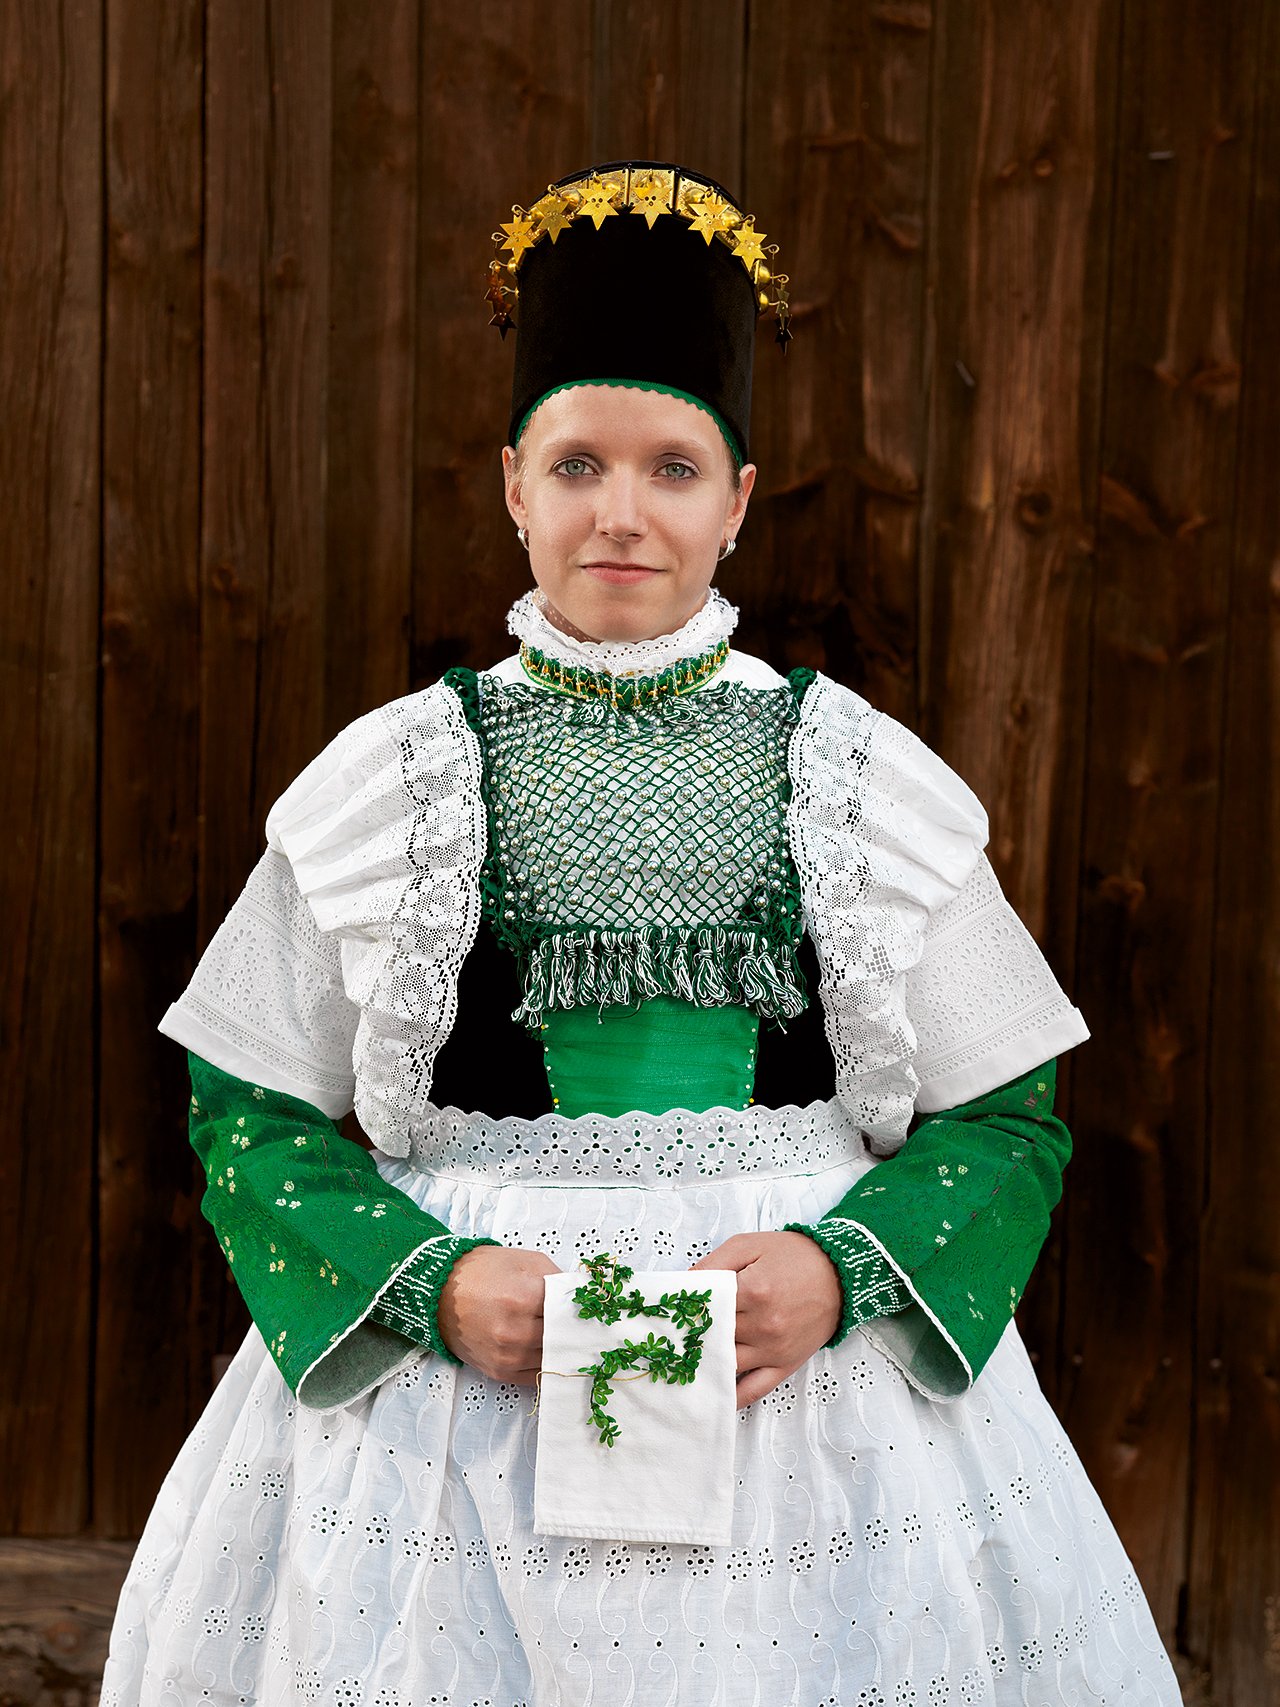 Sorbian Tracht
Saxony, Bröthen
Photo by Gregor Hohenberg
from 'Traditional Couture'
© Gestalten 2015.